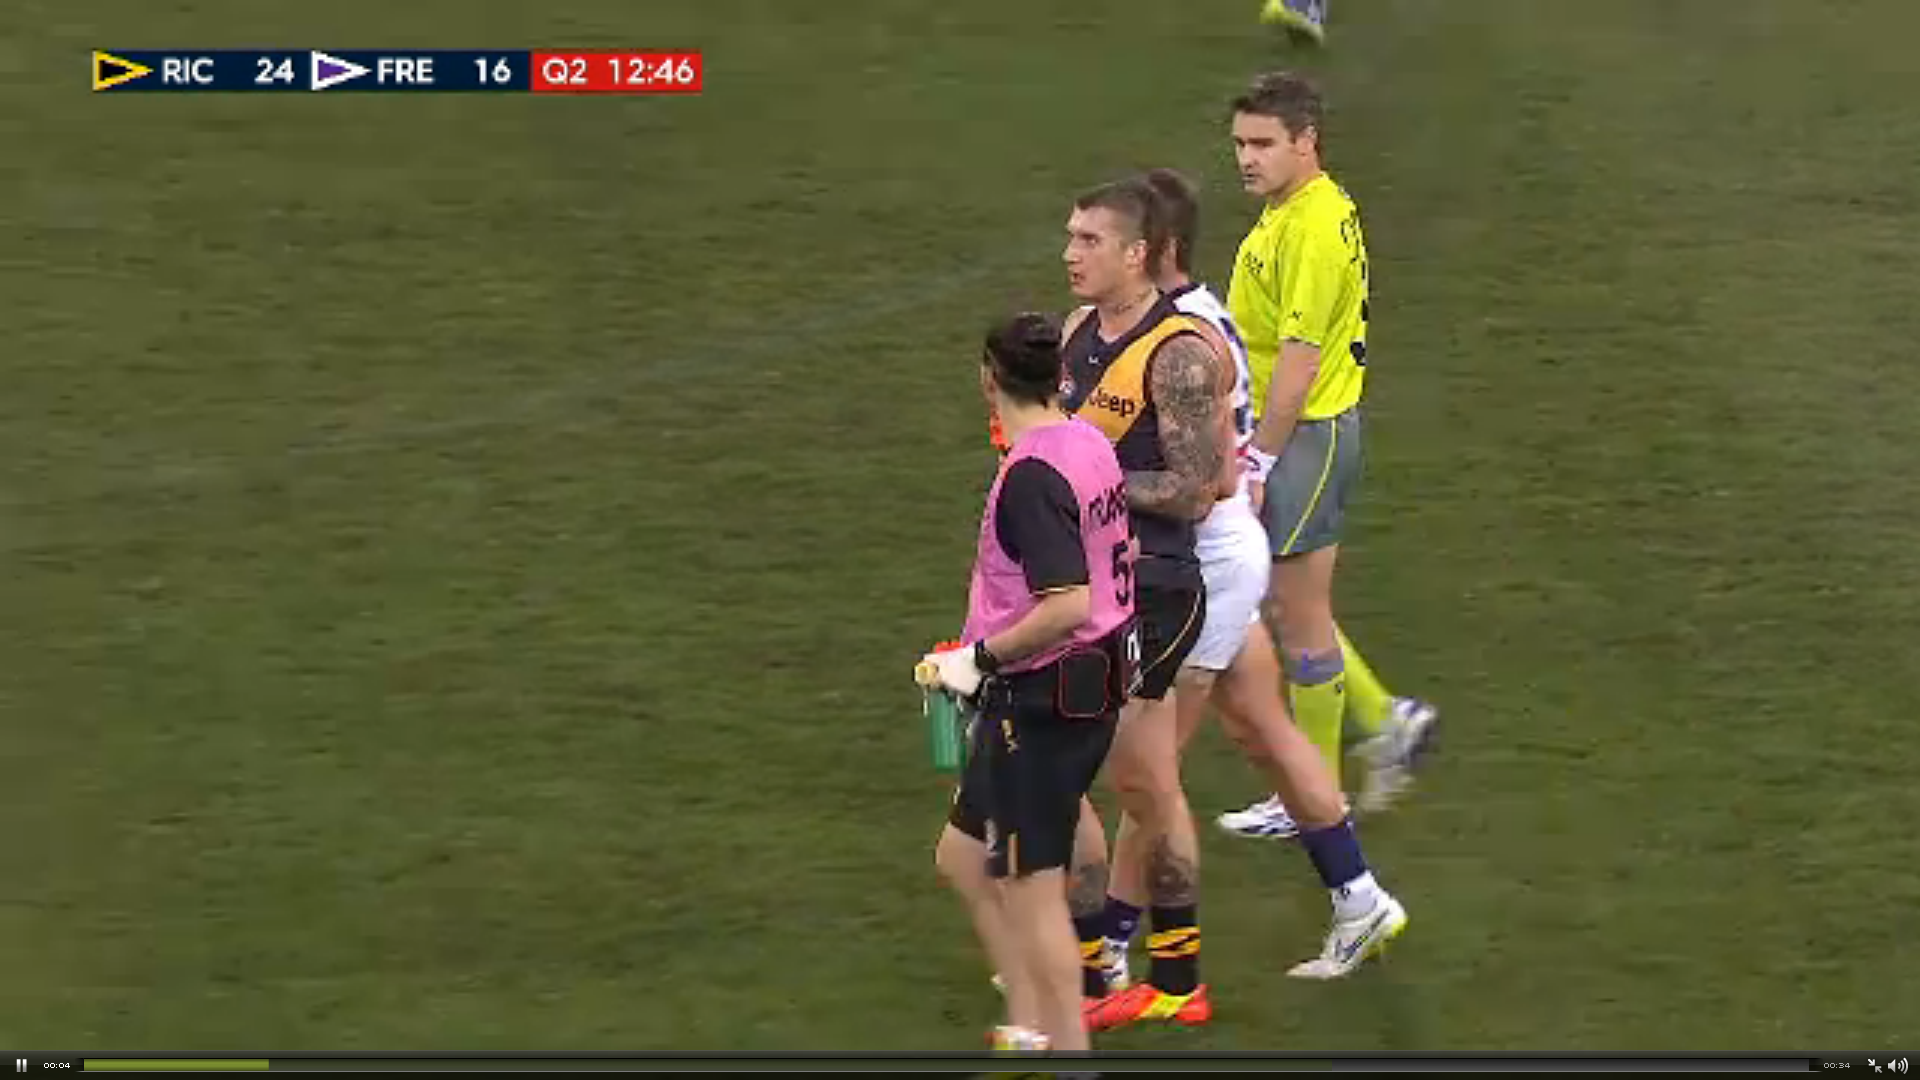 Did He Not Notice That The Umpire Was There - Australian Rules Football - HD Wallpaper 